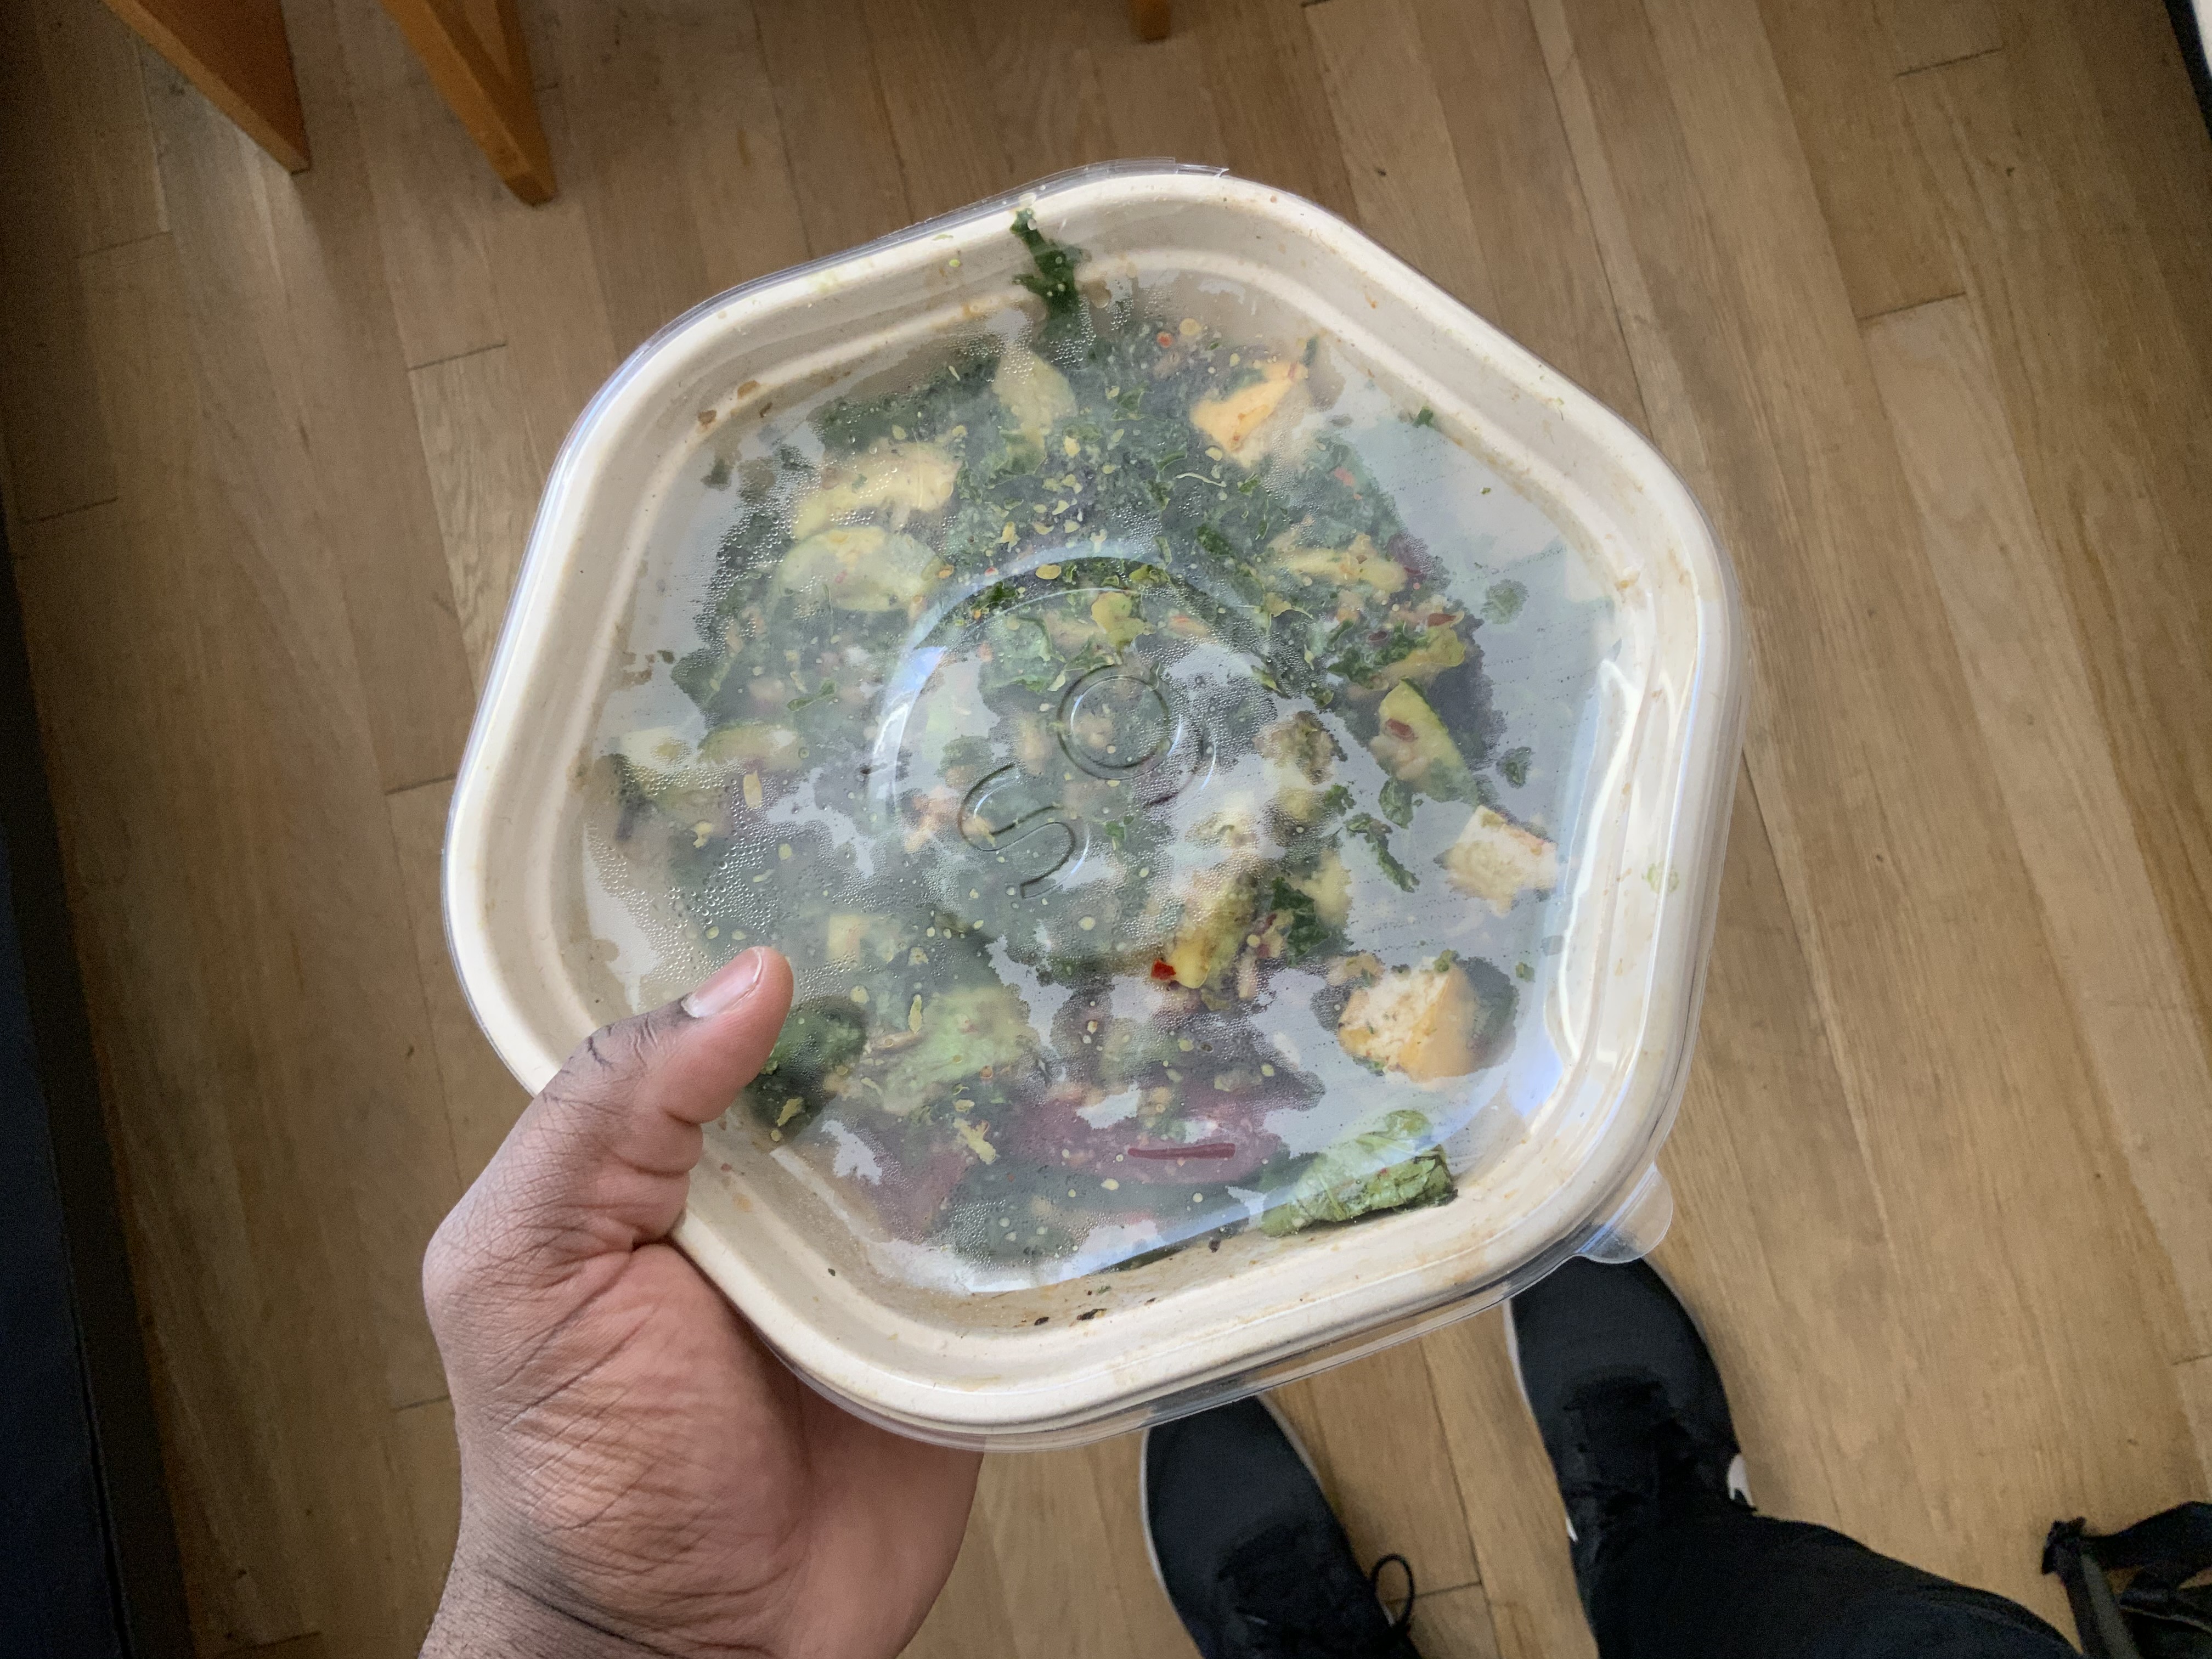 Me holding a bowl of sweetgreen salad